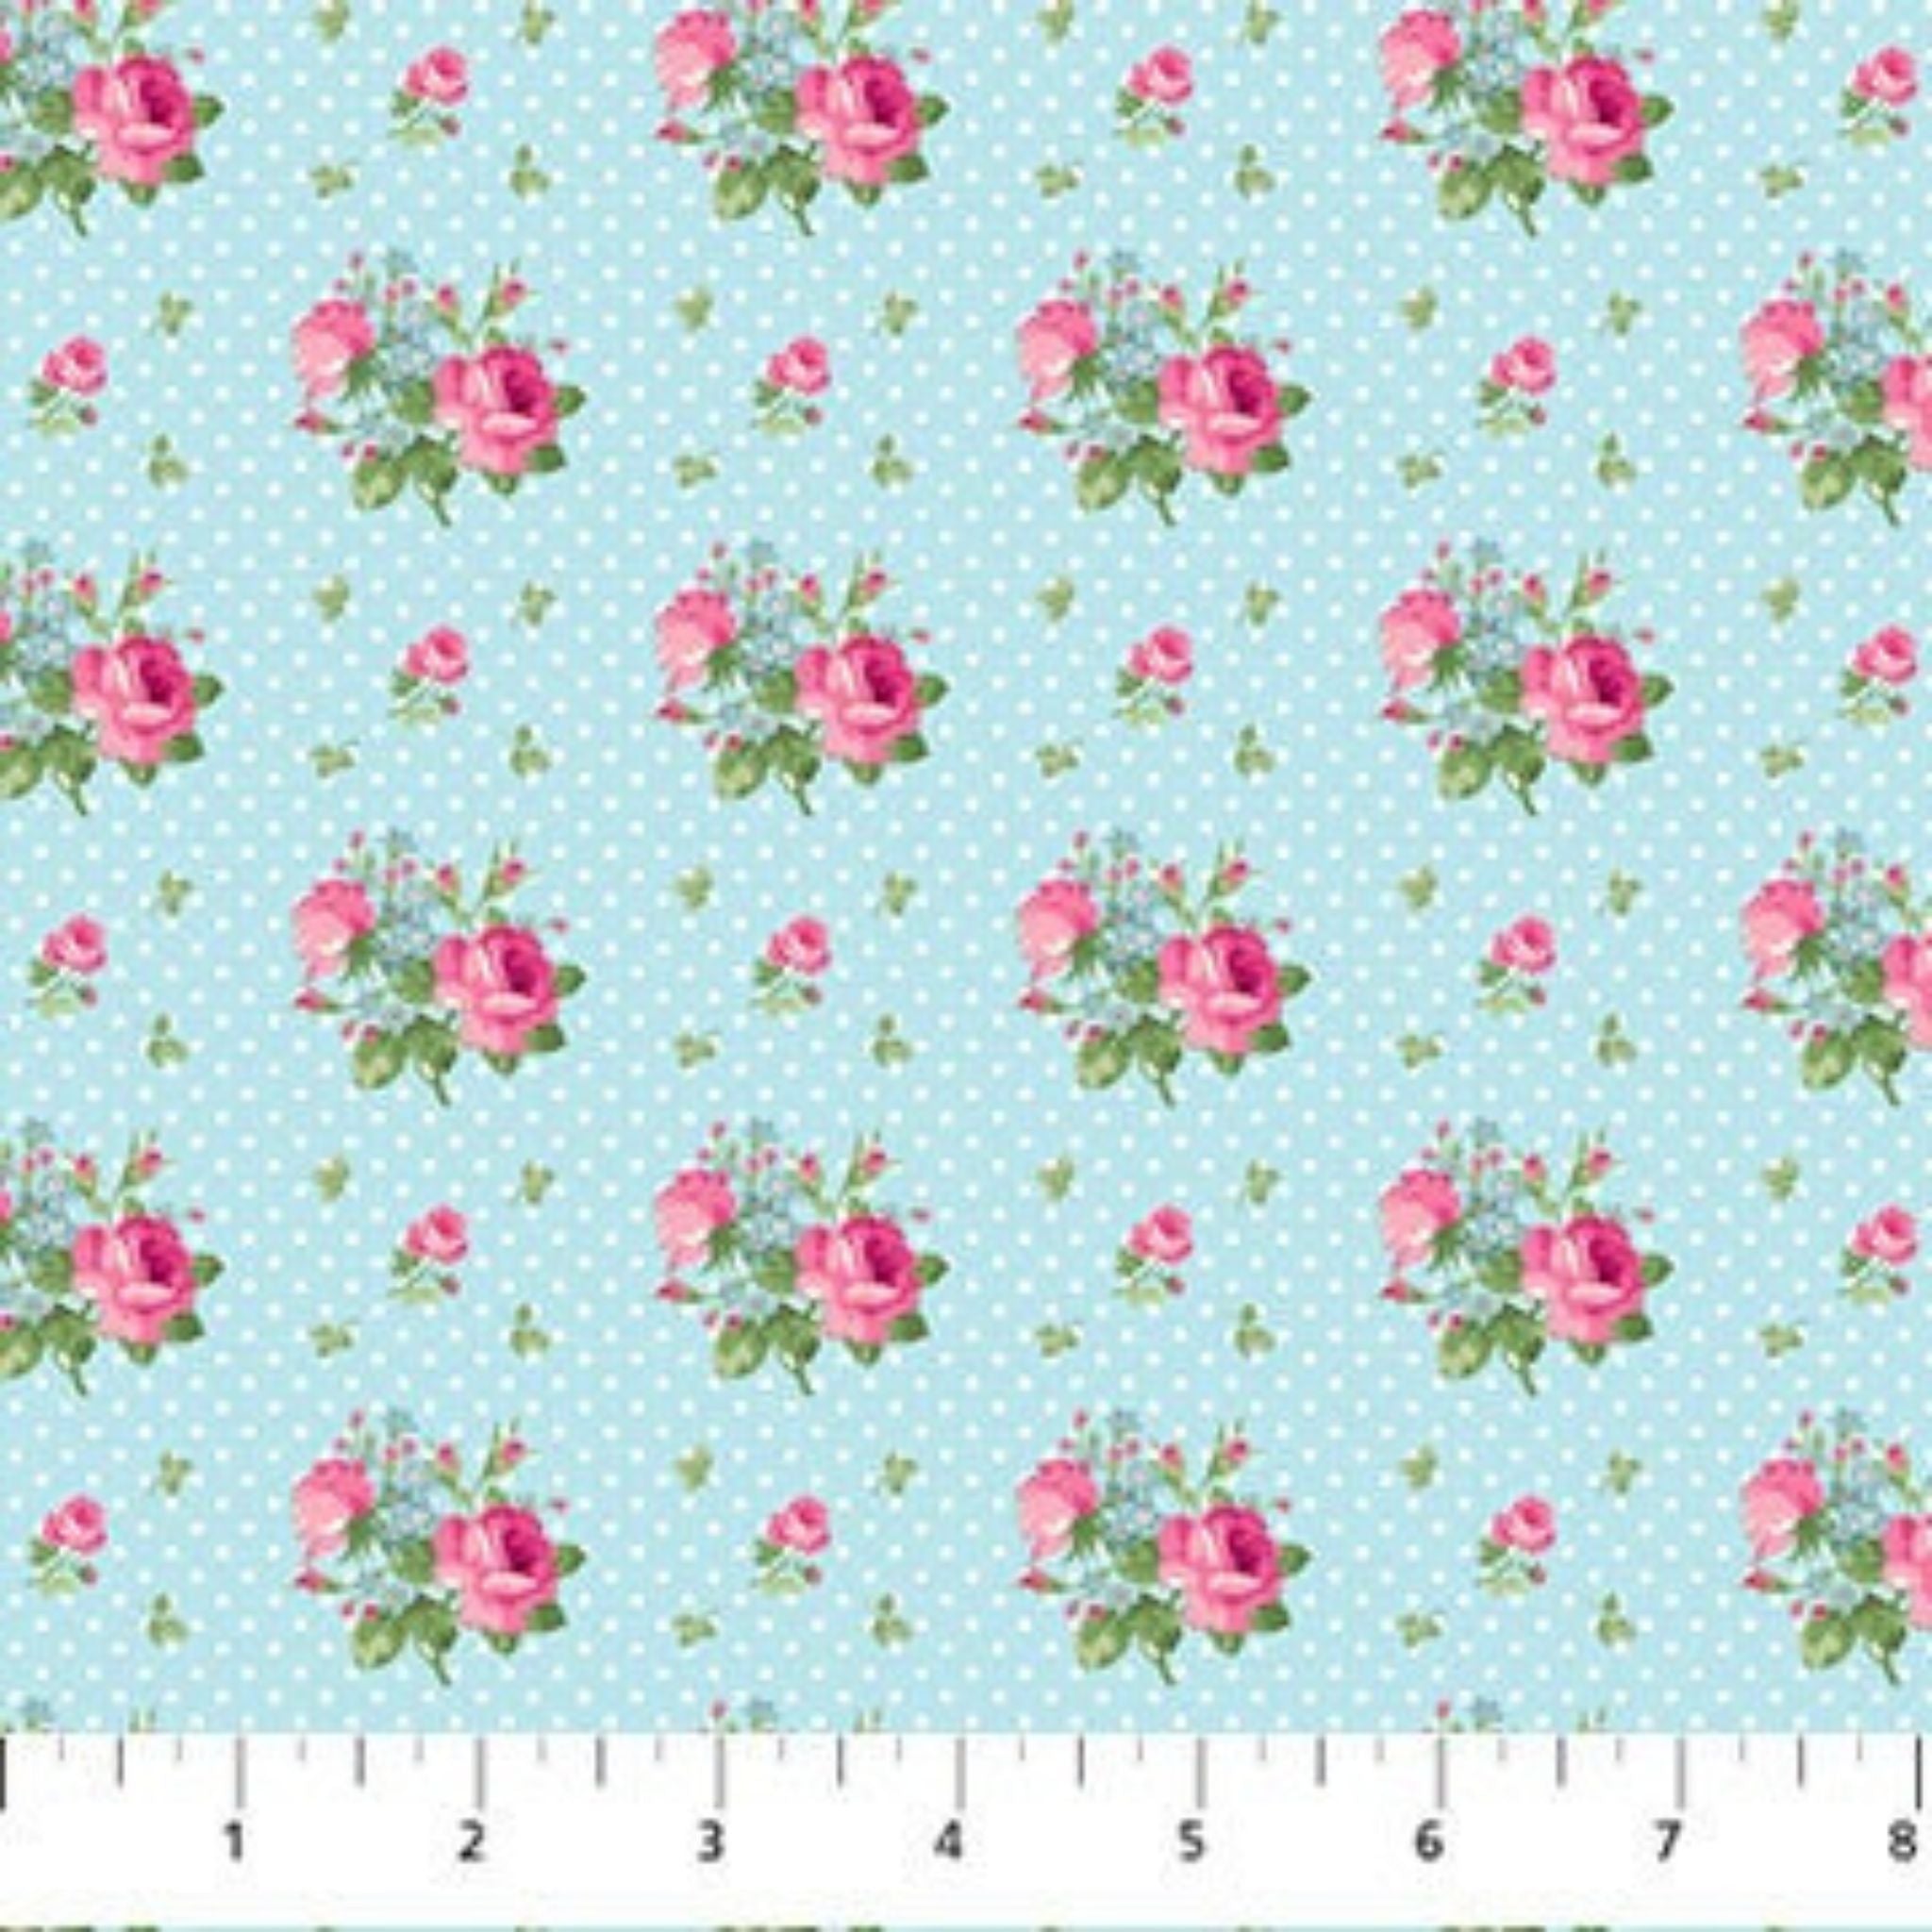 Roses on a pale blue polka dot cotton fabric - Tea for Two by Northcott